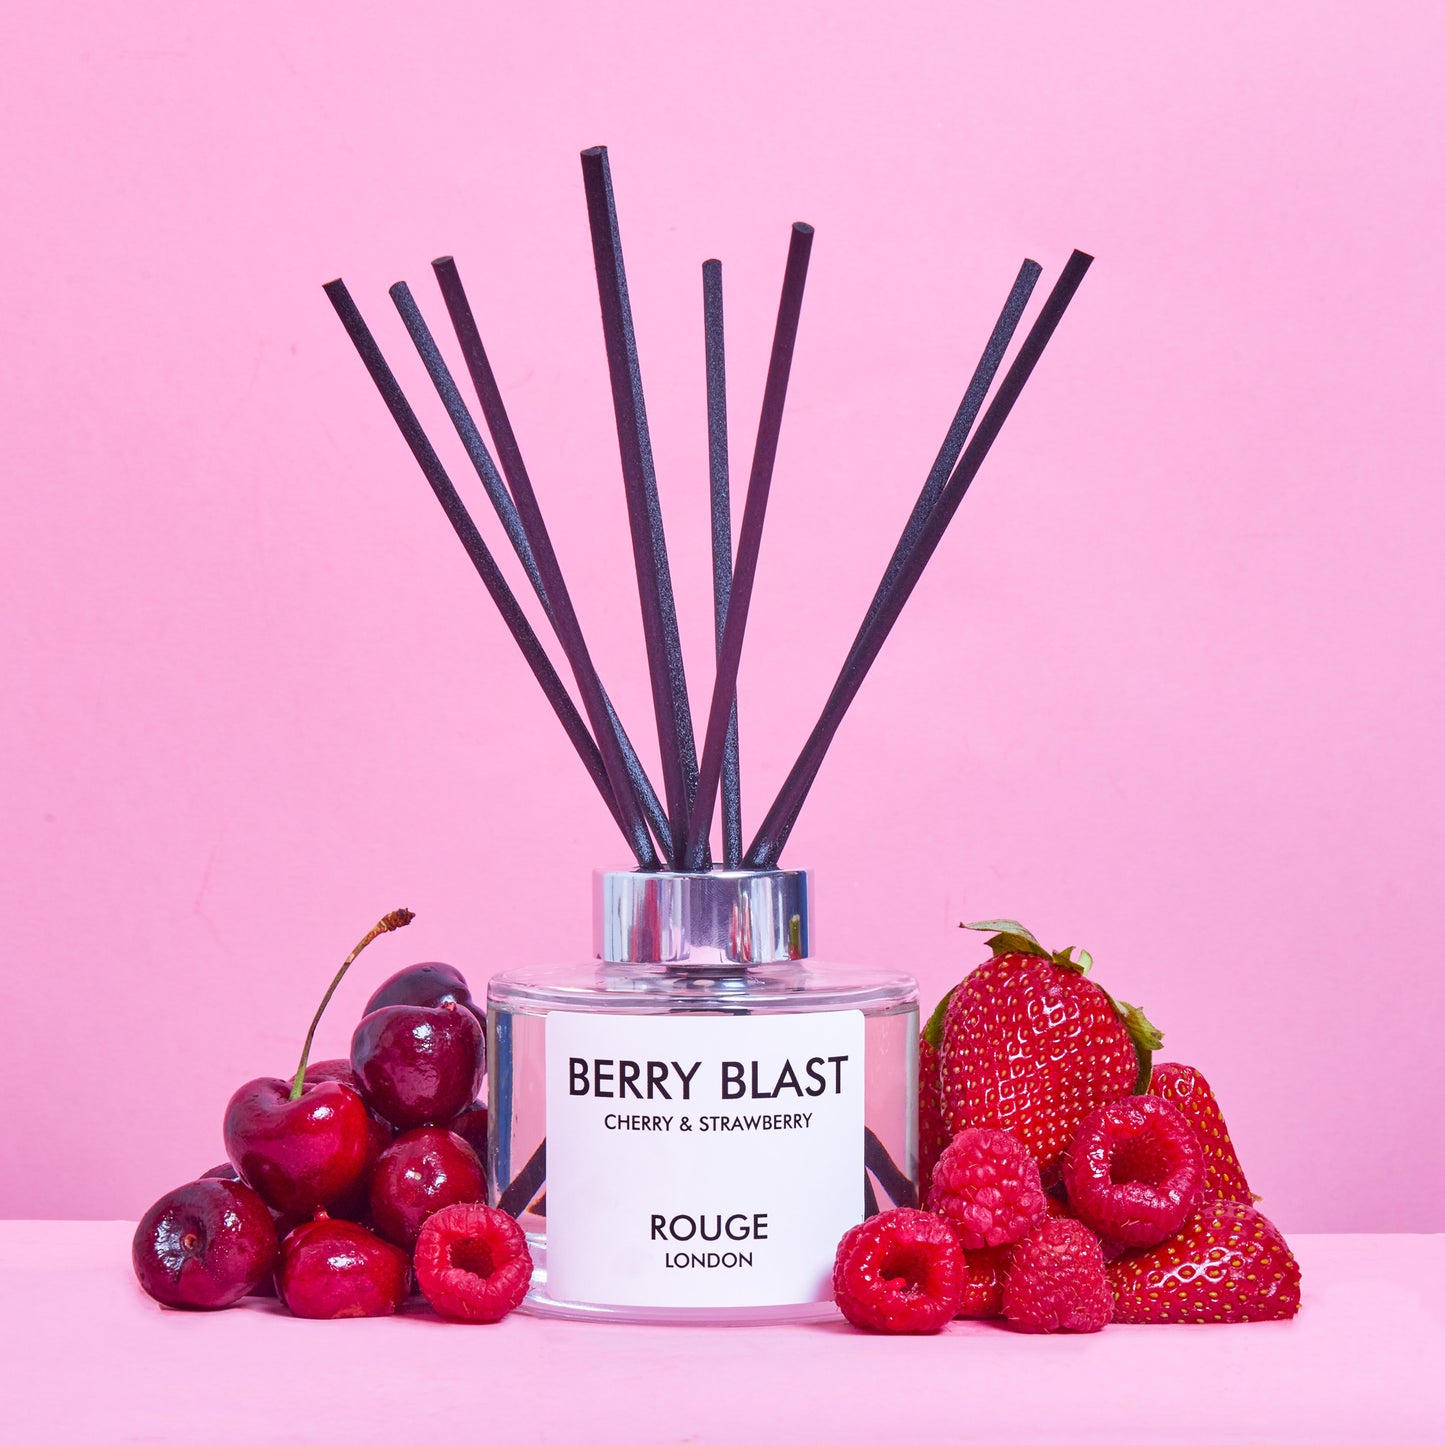 Berry Blast - Cherry & Strawberry Luxury Scented Reed Diffuser - By Rouge London